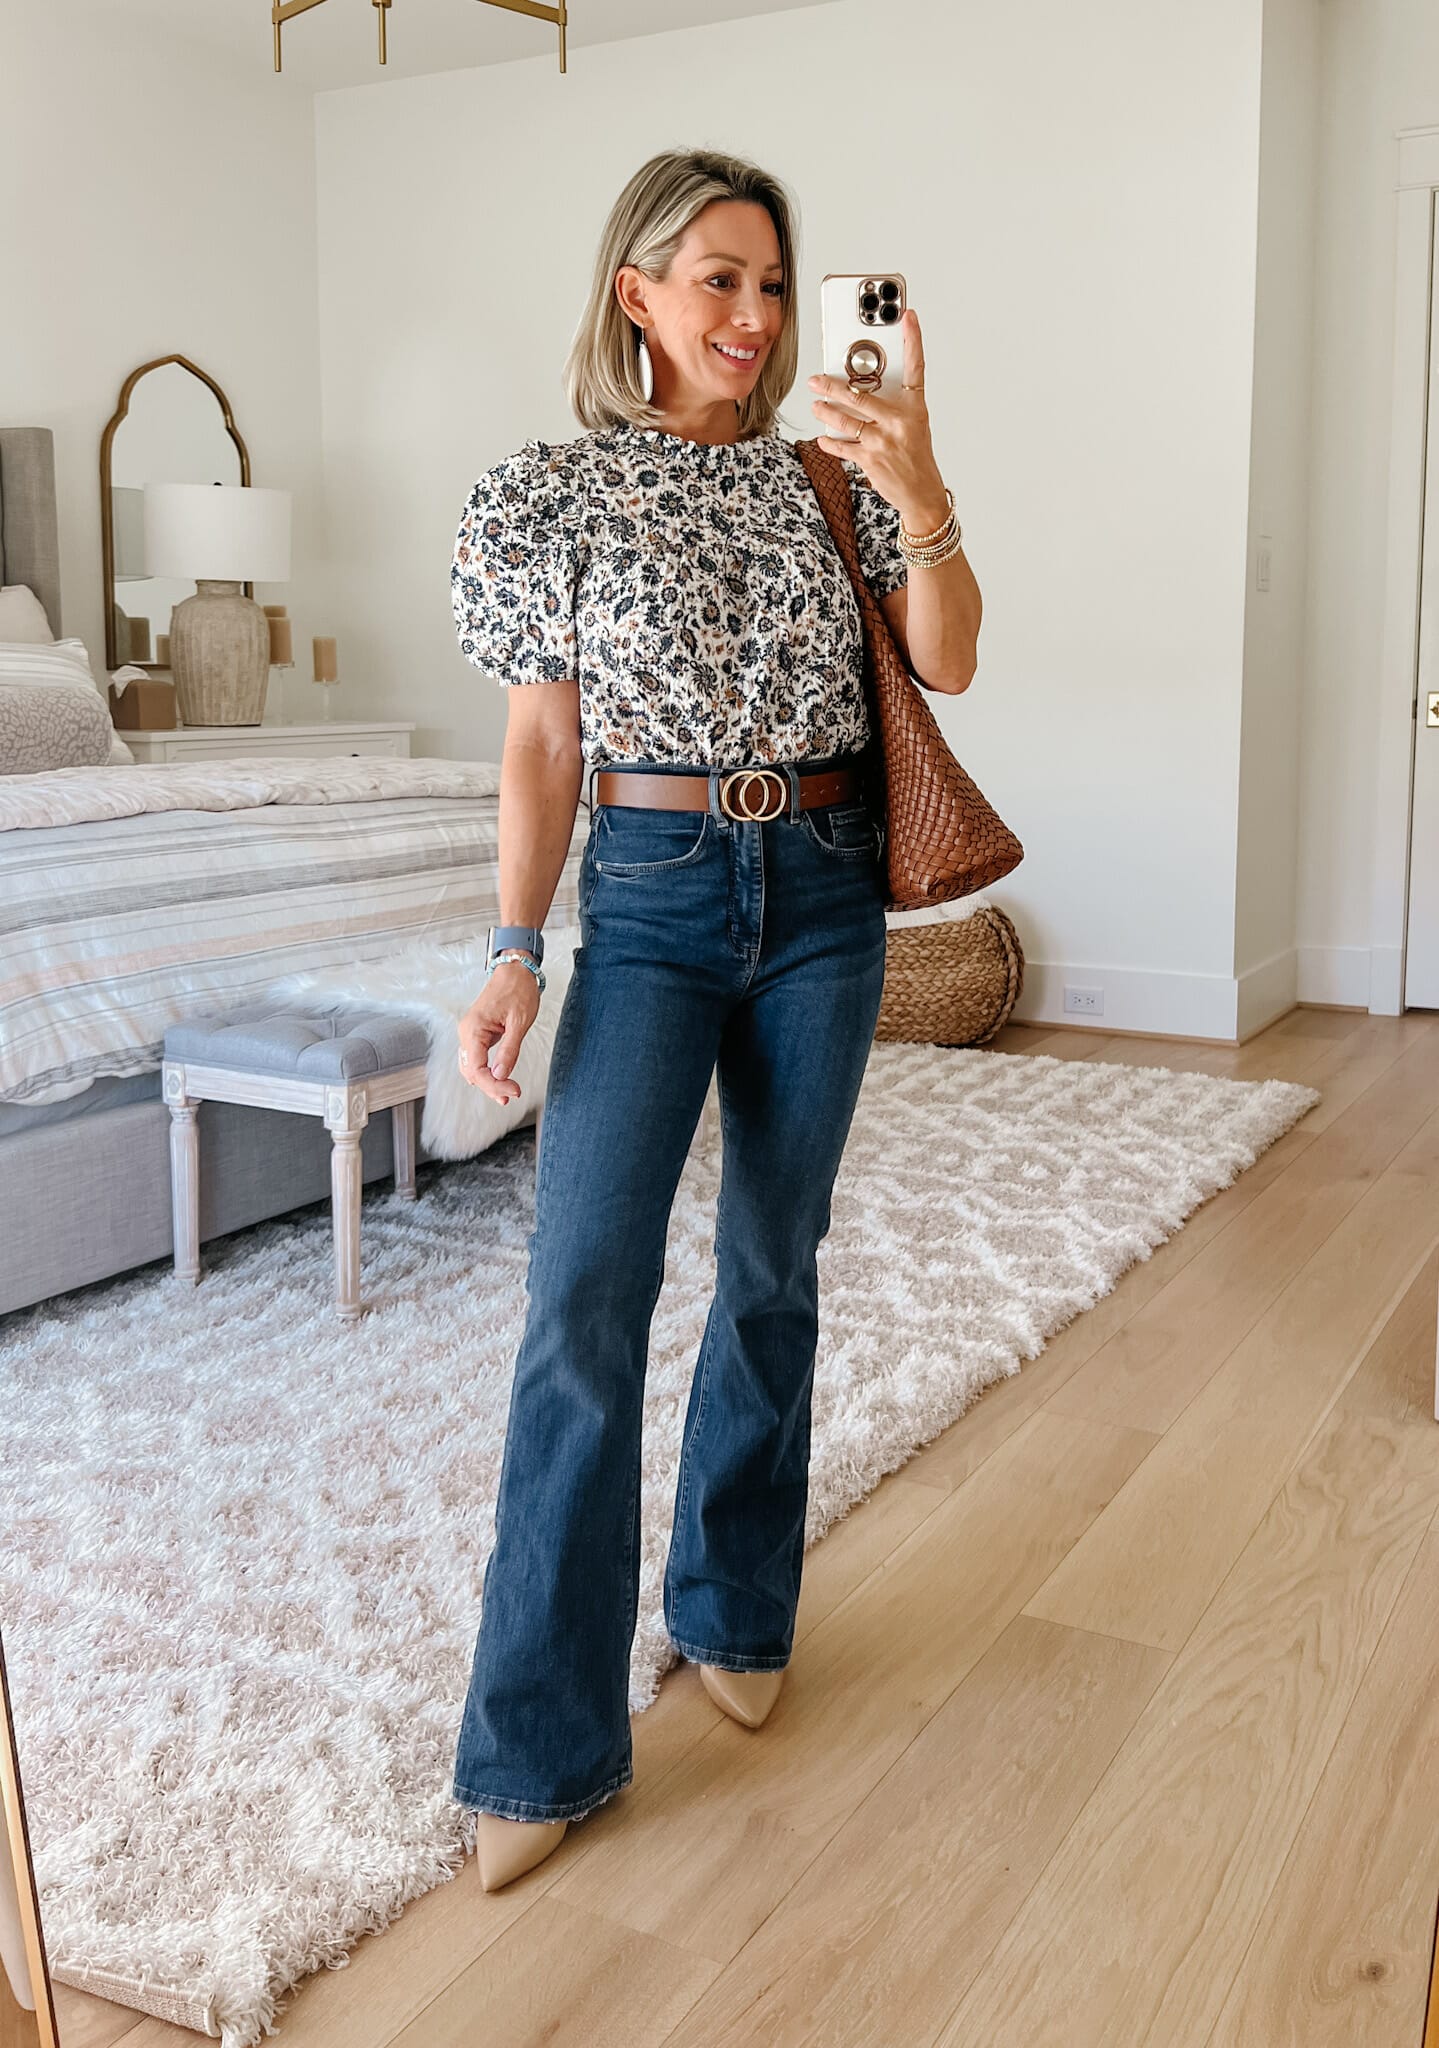 Floral Top with Puff Sleeves, Jeans, Heels, Belt, Woven Bag 